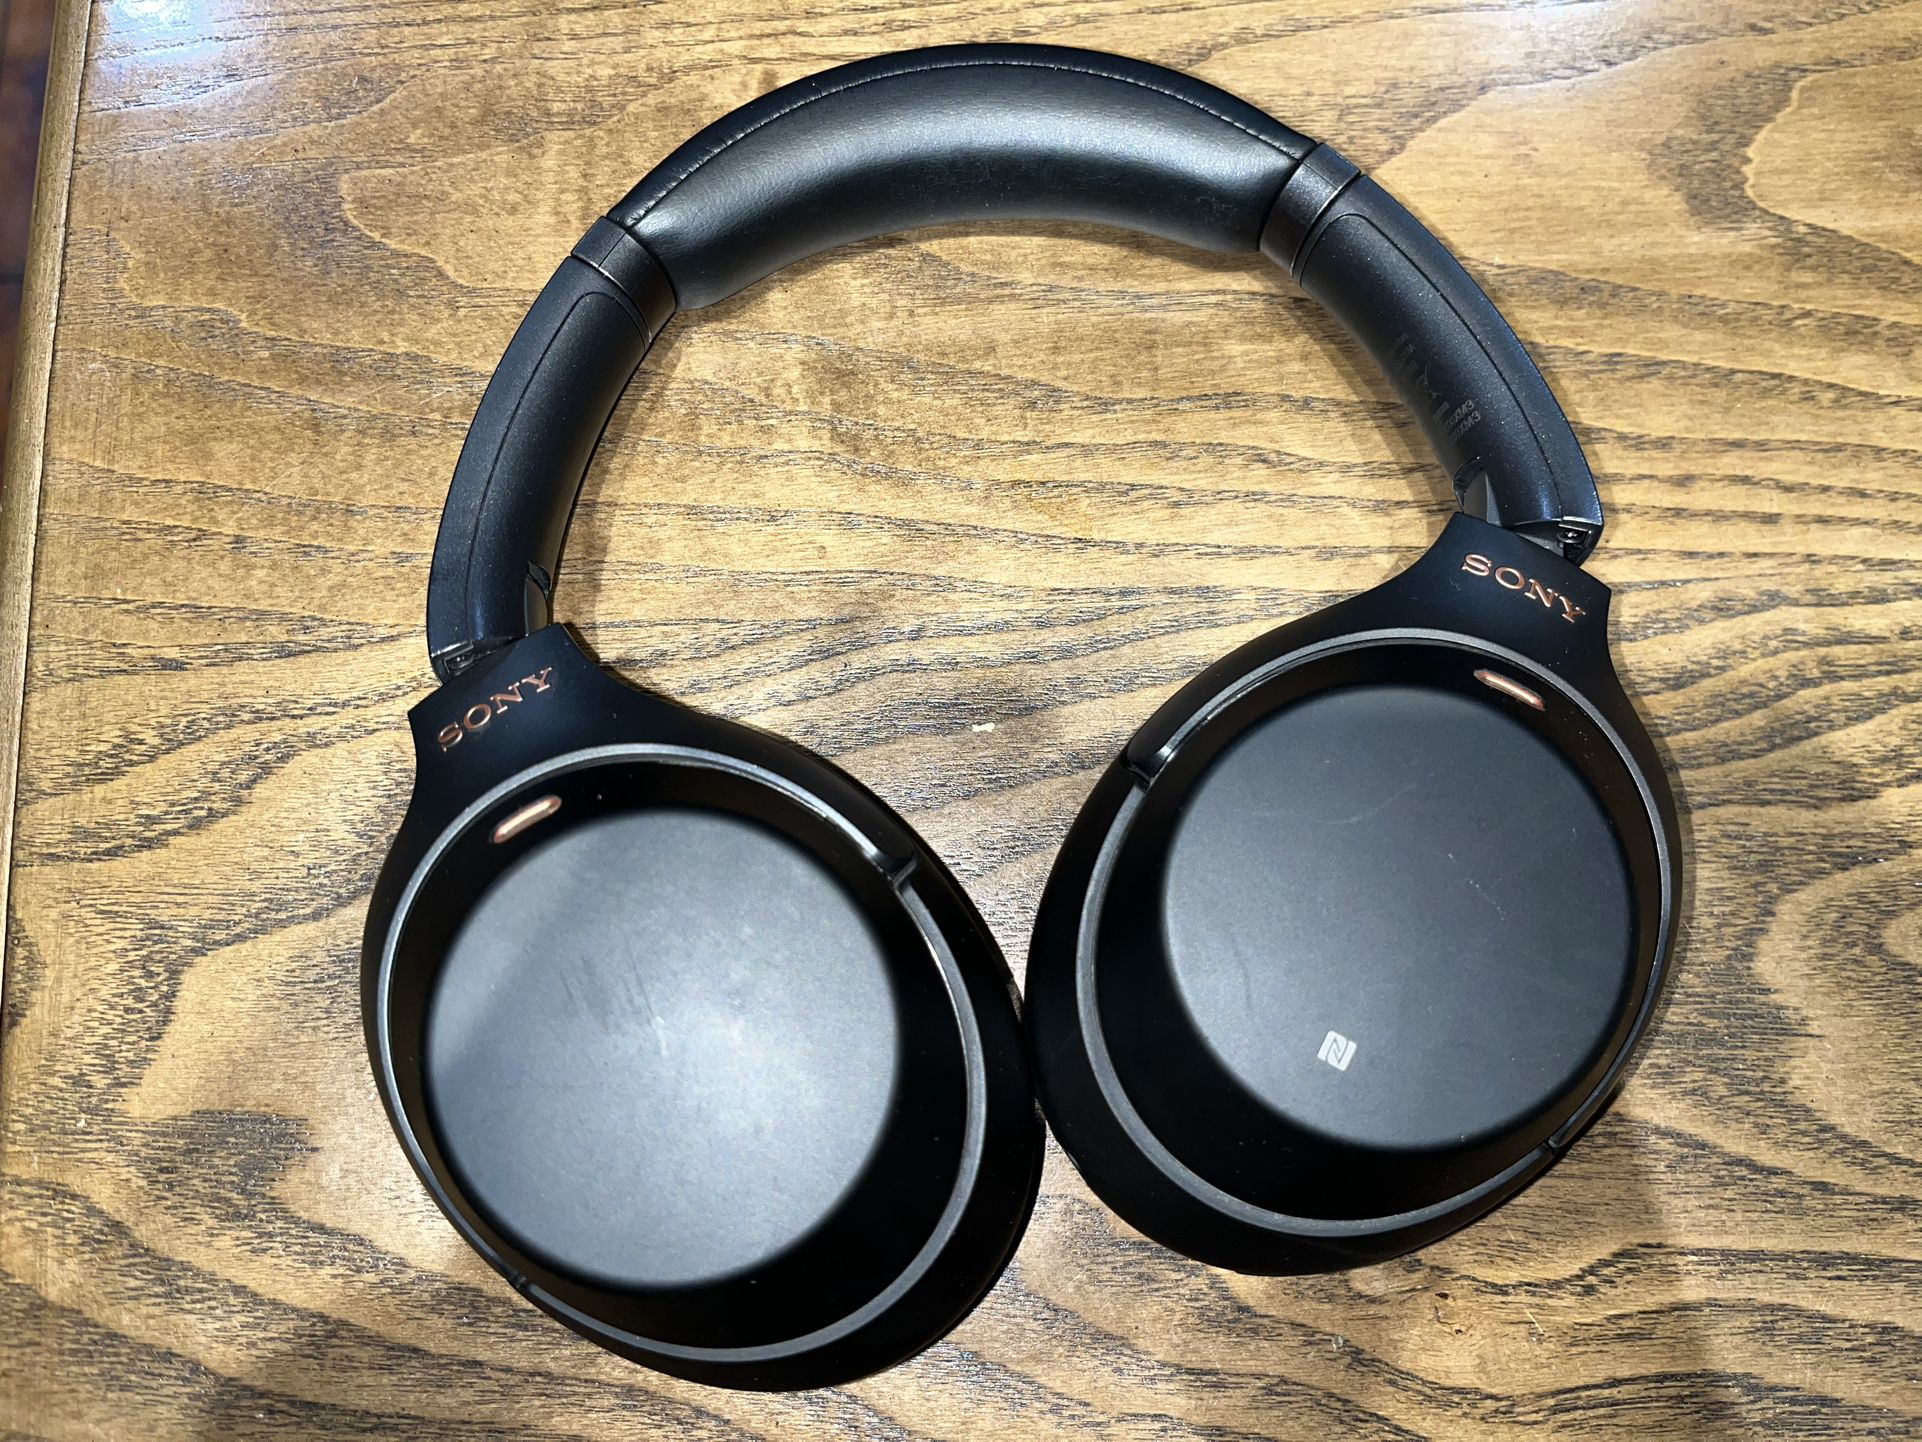 WH-1000XM3 Wireless Noise Cancelling Headphones